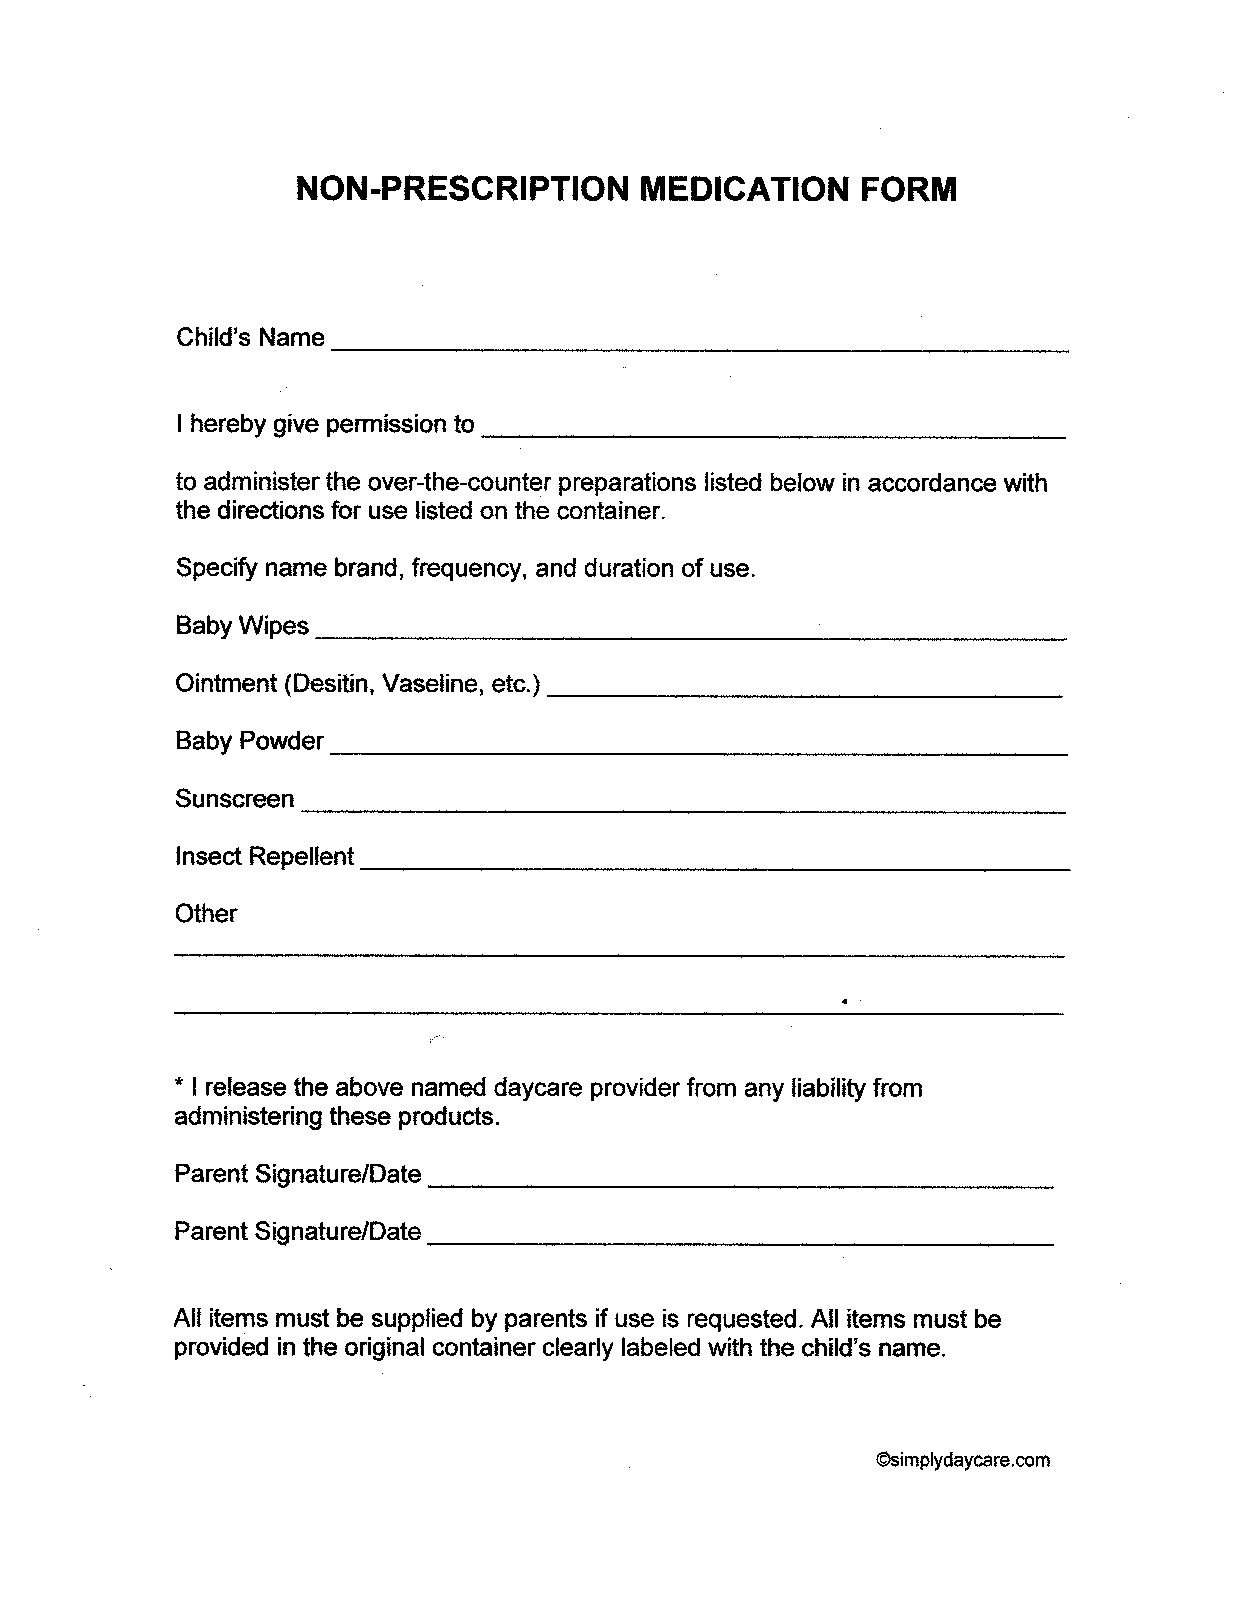 Daycare Over-the-Counter Medication Form